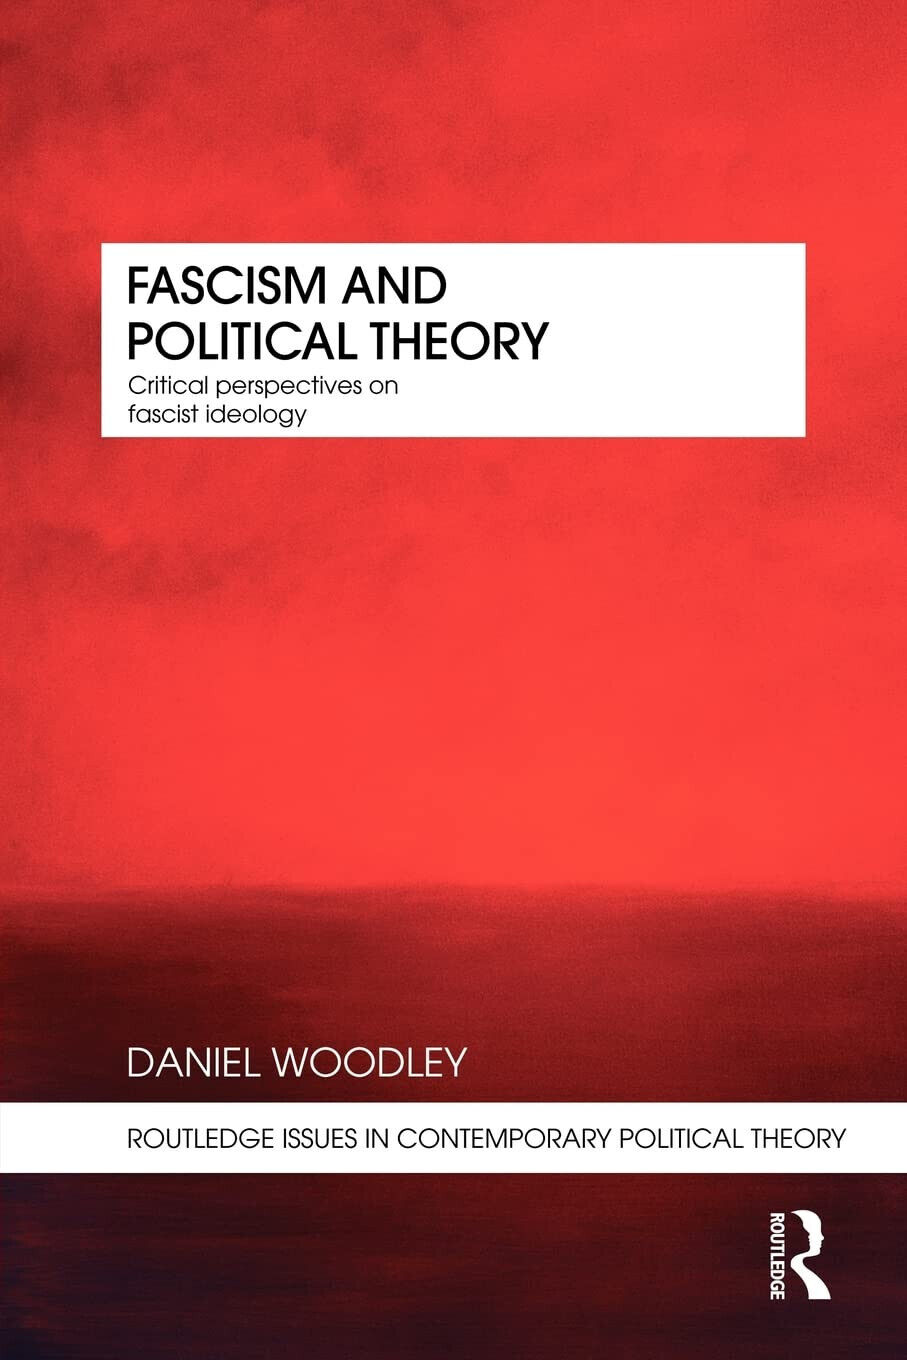 Fascism and Political Theory - Daniel - Routledge, 2009 libro usato